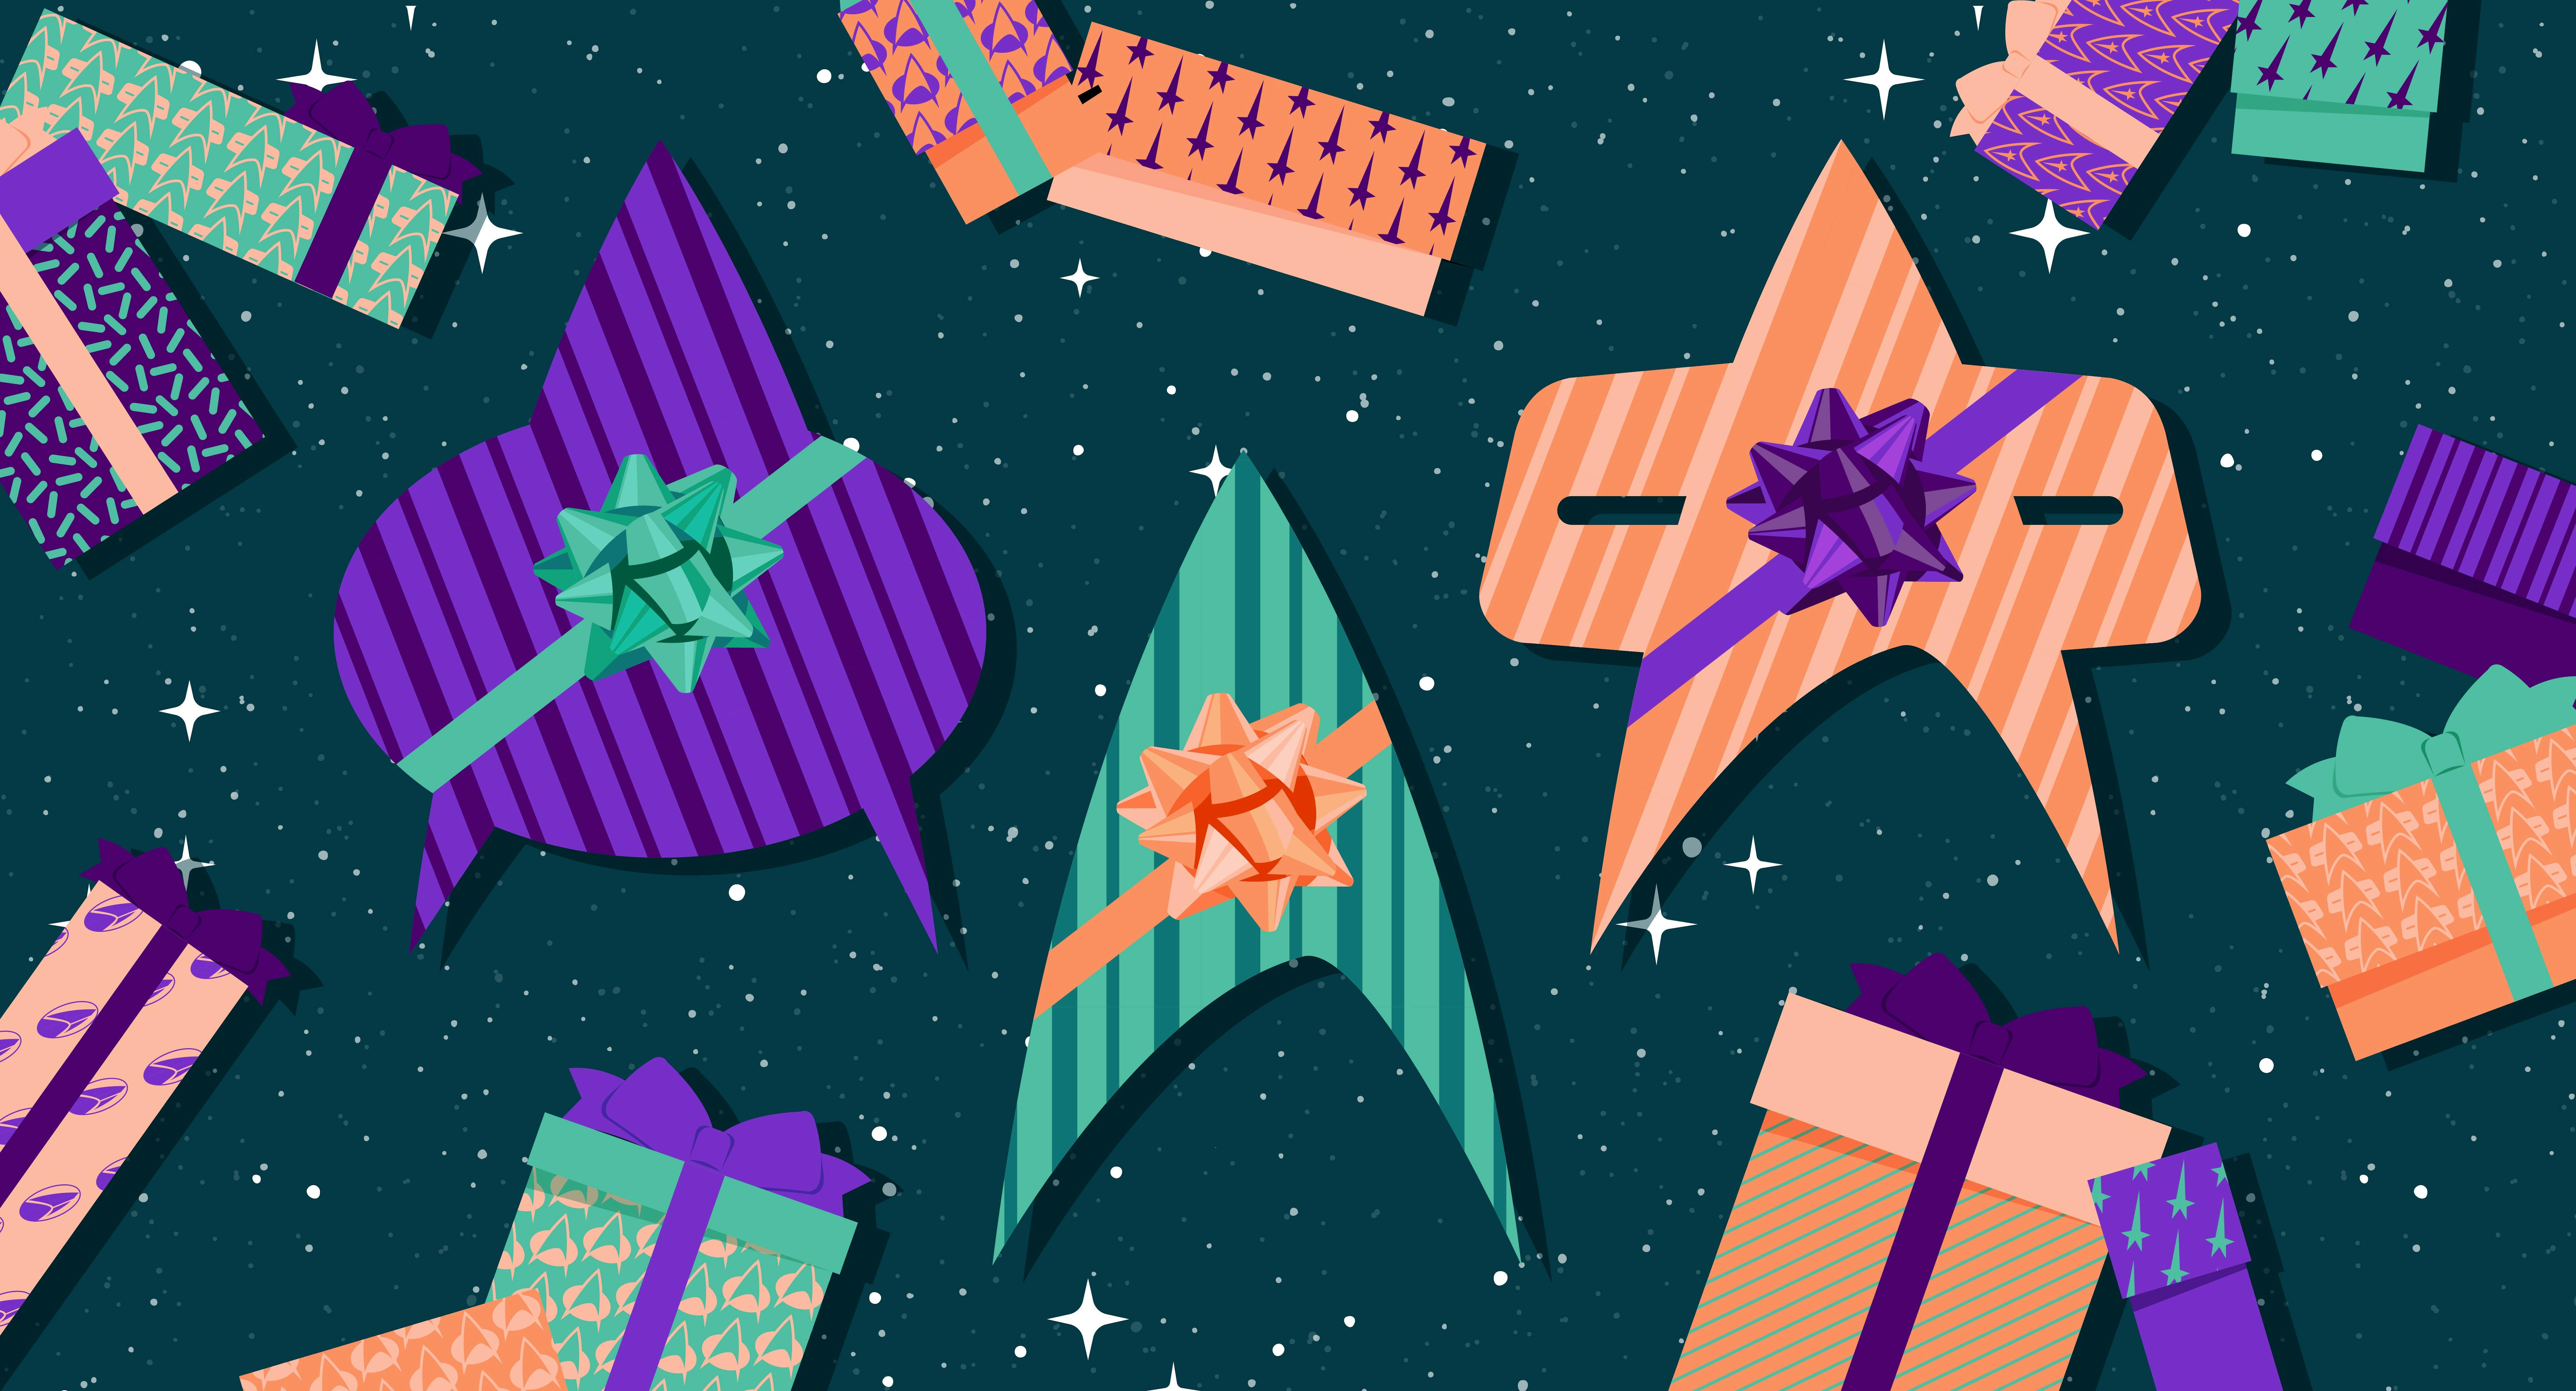 Illustrated banner of Star Trek deltas as wrapped presents